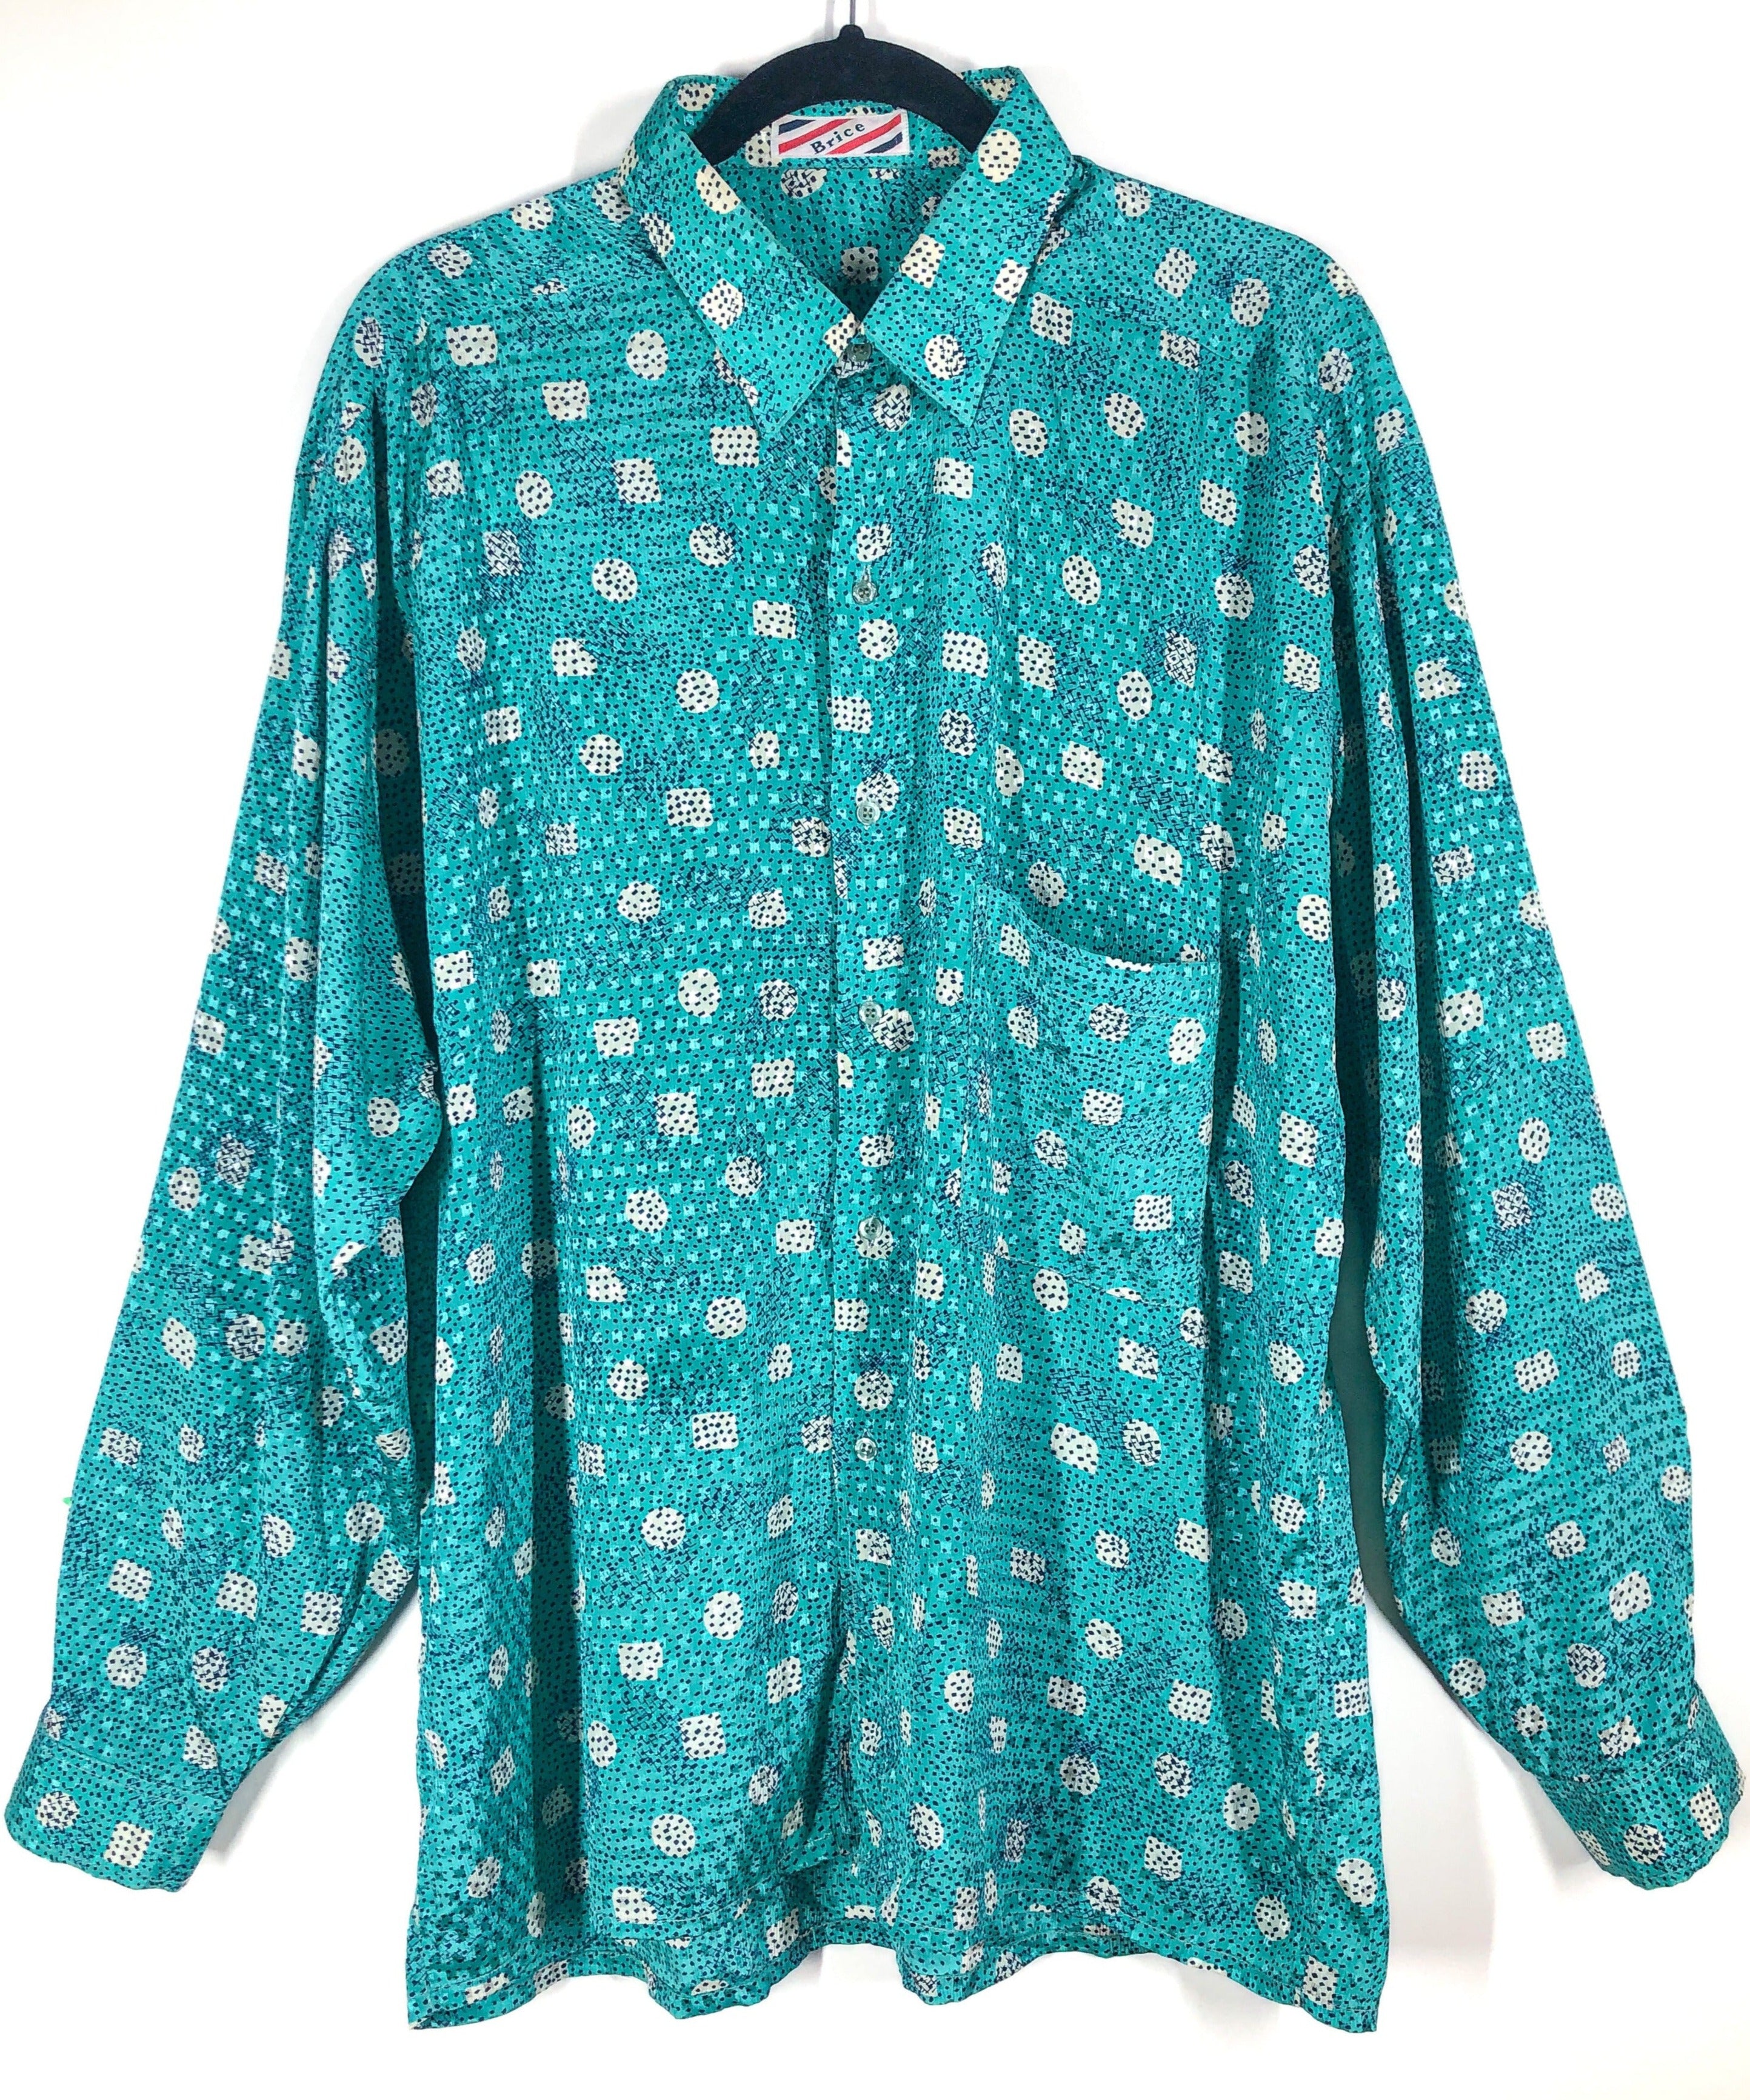 Vintage Silk Teal Button Up Shirt, Brice Brand Made in France Abstract Print and Jaquard Detailing